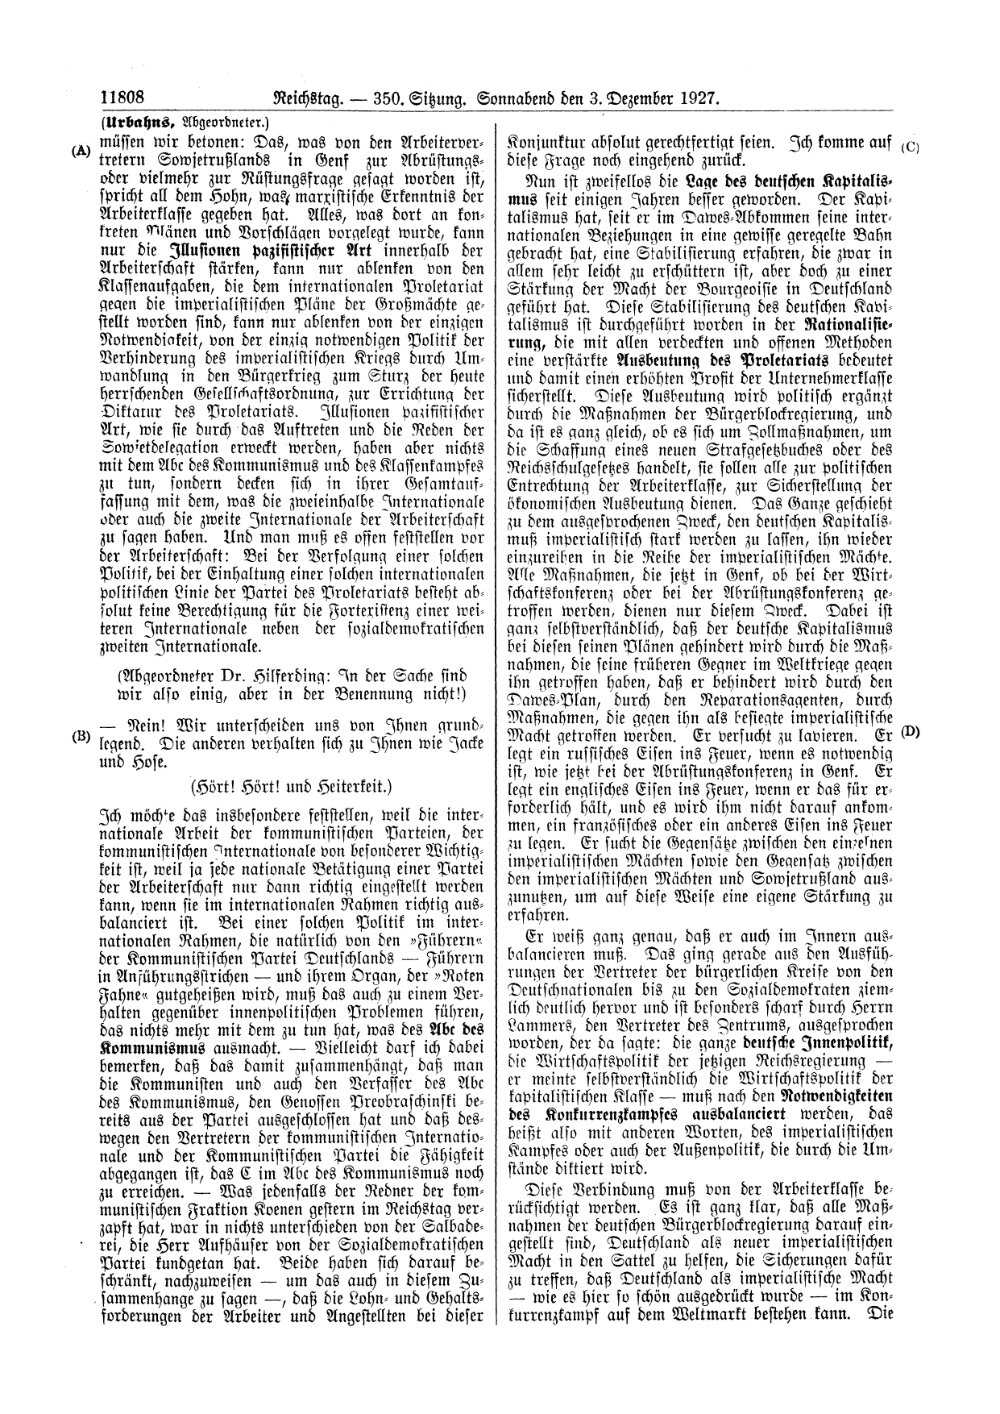 Scan of page 11808